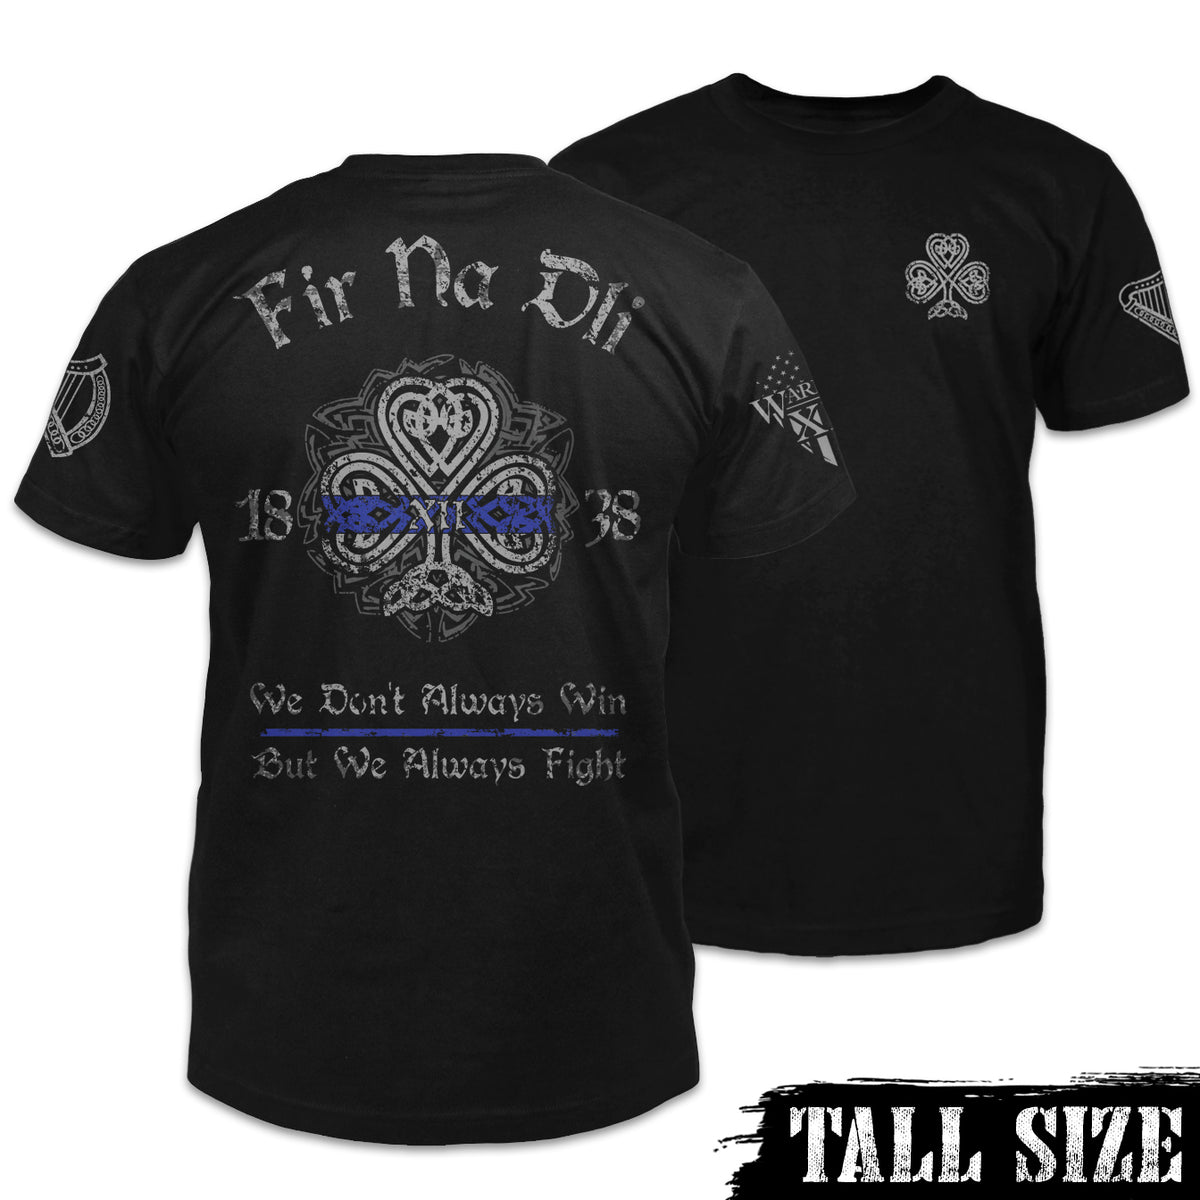 Front & back black tall size shirt paying tribute to history and traditions of Irish American Law Enforcement and showing true Celtic Pride. Fir Na Dli, meaning, men of law‚ in Gaelic, is written across the back.